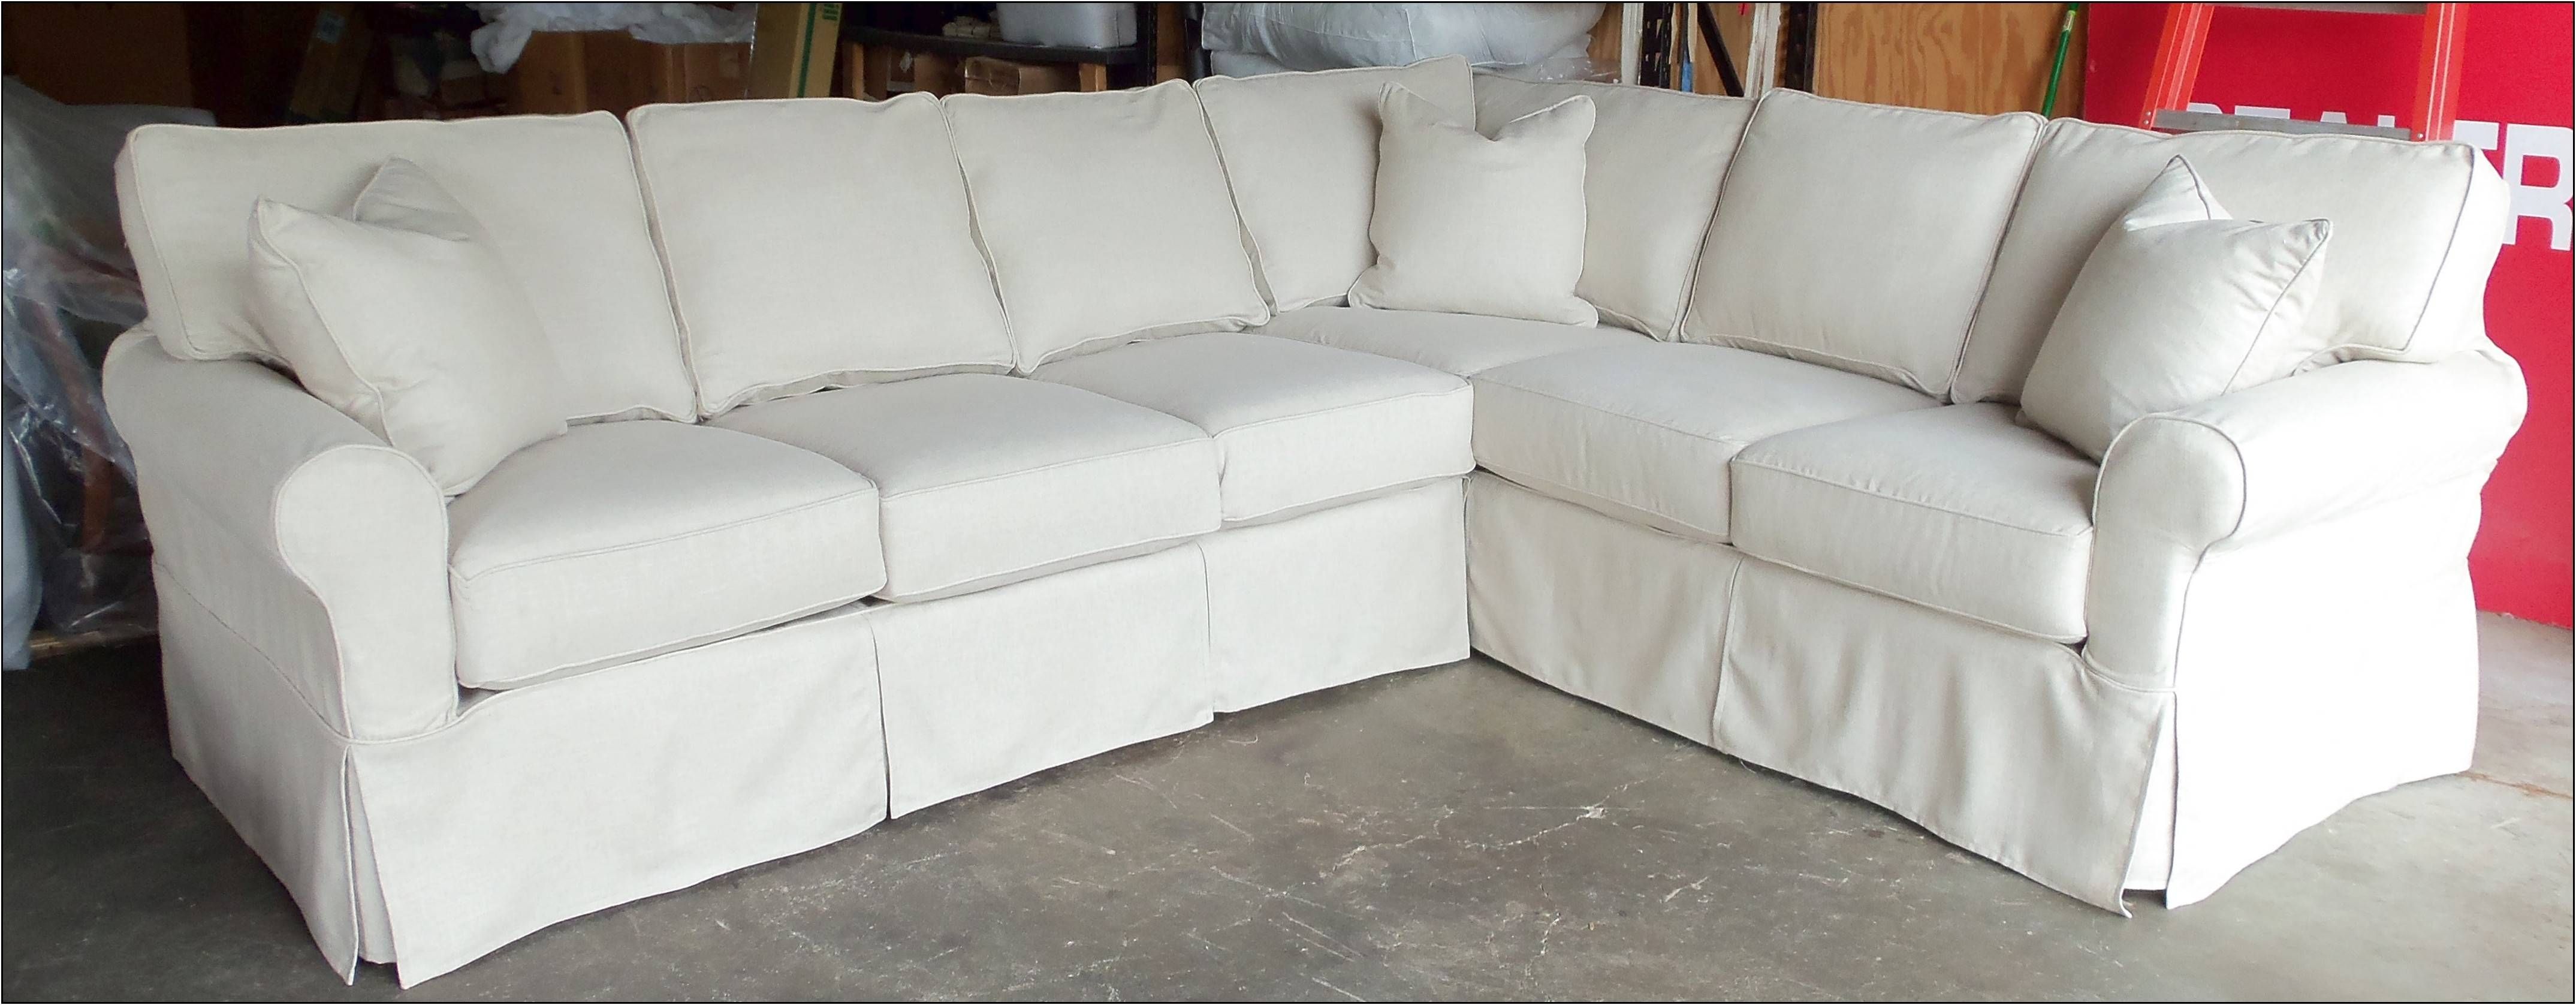 Furniture: Slipcovers For Couch | Walmart Chair Covers | Sofa With Regard To Walmart Slipcovers For Sofas (View 27 of 30)